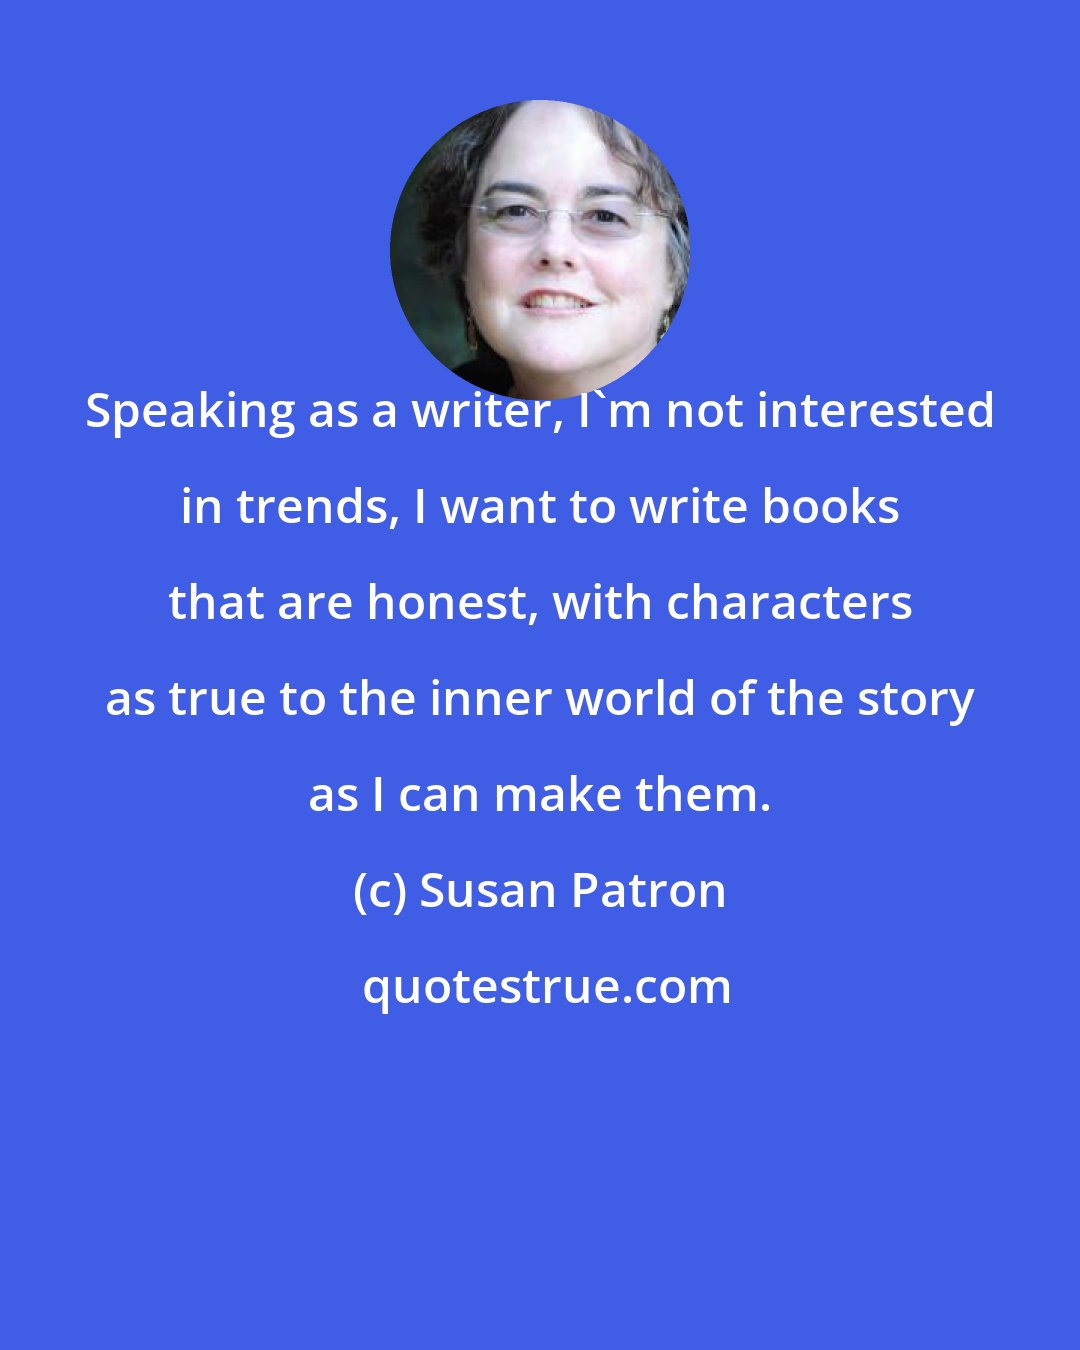 Susan Patron: Speaking as a writer, I'm not interested in trends, I want to write books that are honest, with characters as true to the inner world of the story as I can make them.